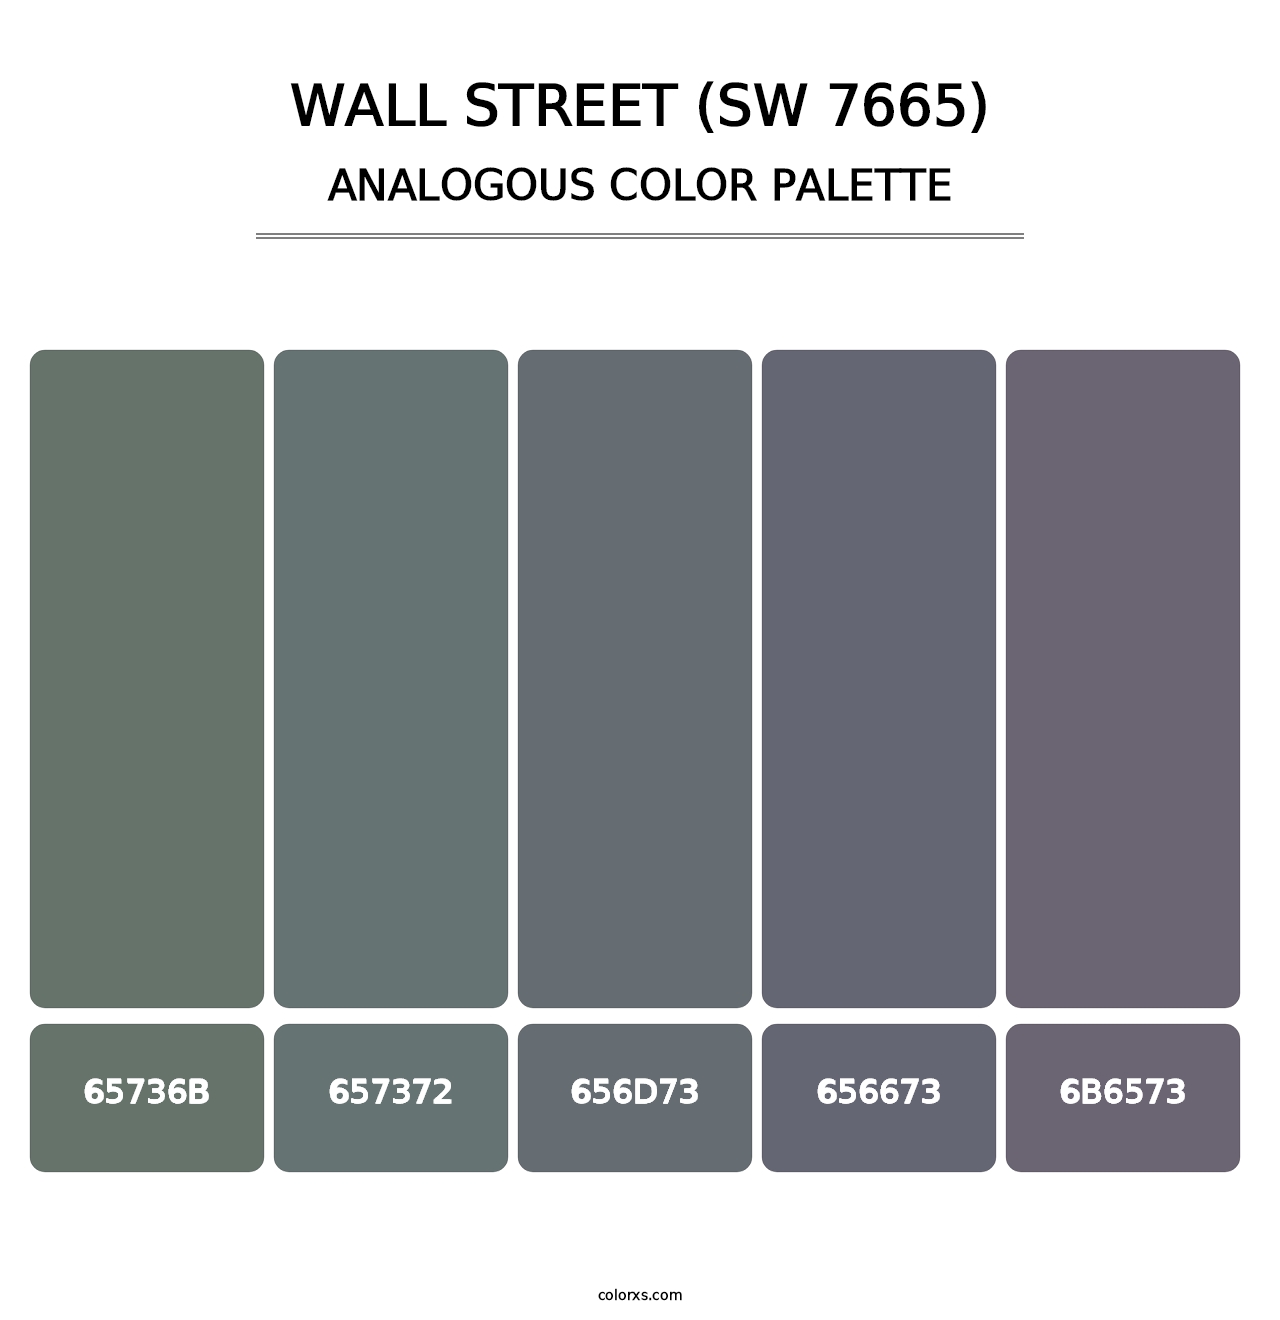 Wall Street (SW 7665) - Analogous Color Palette